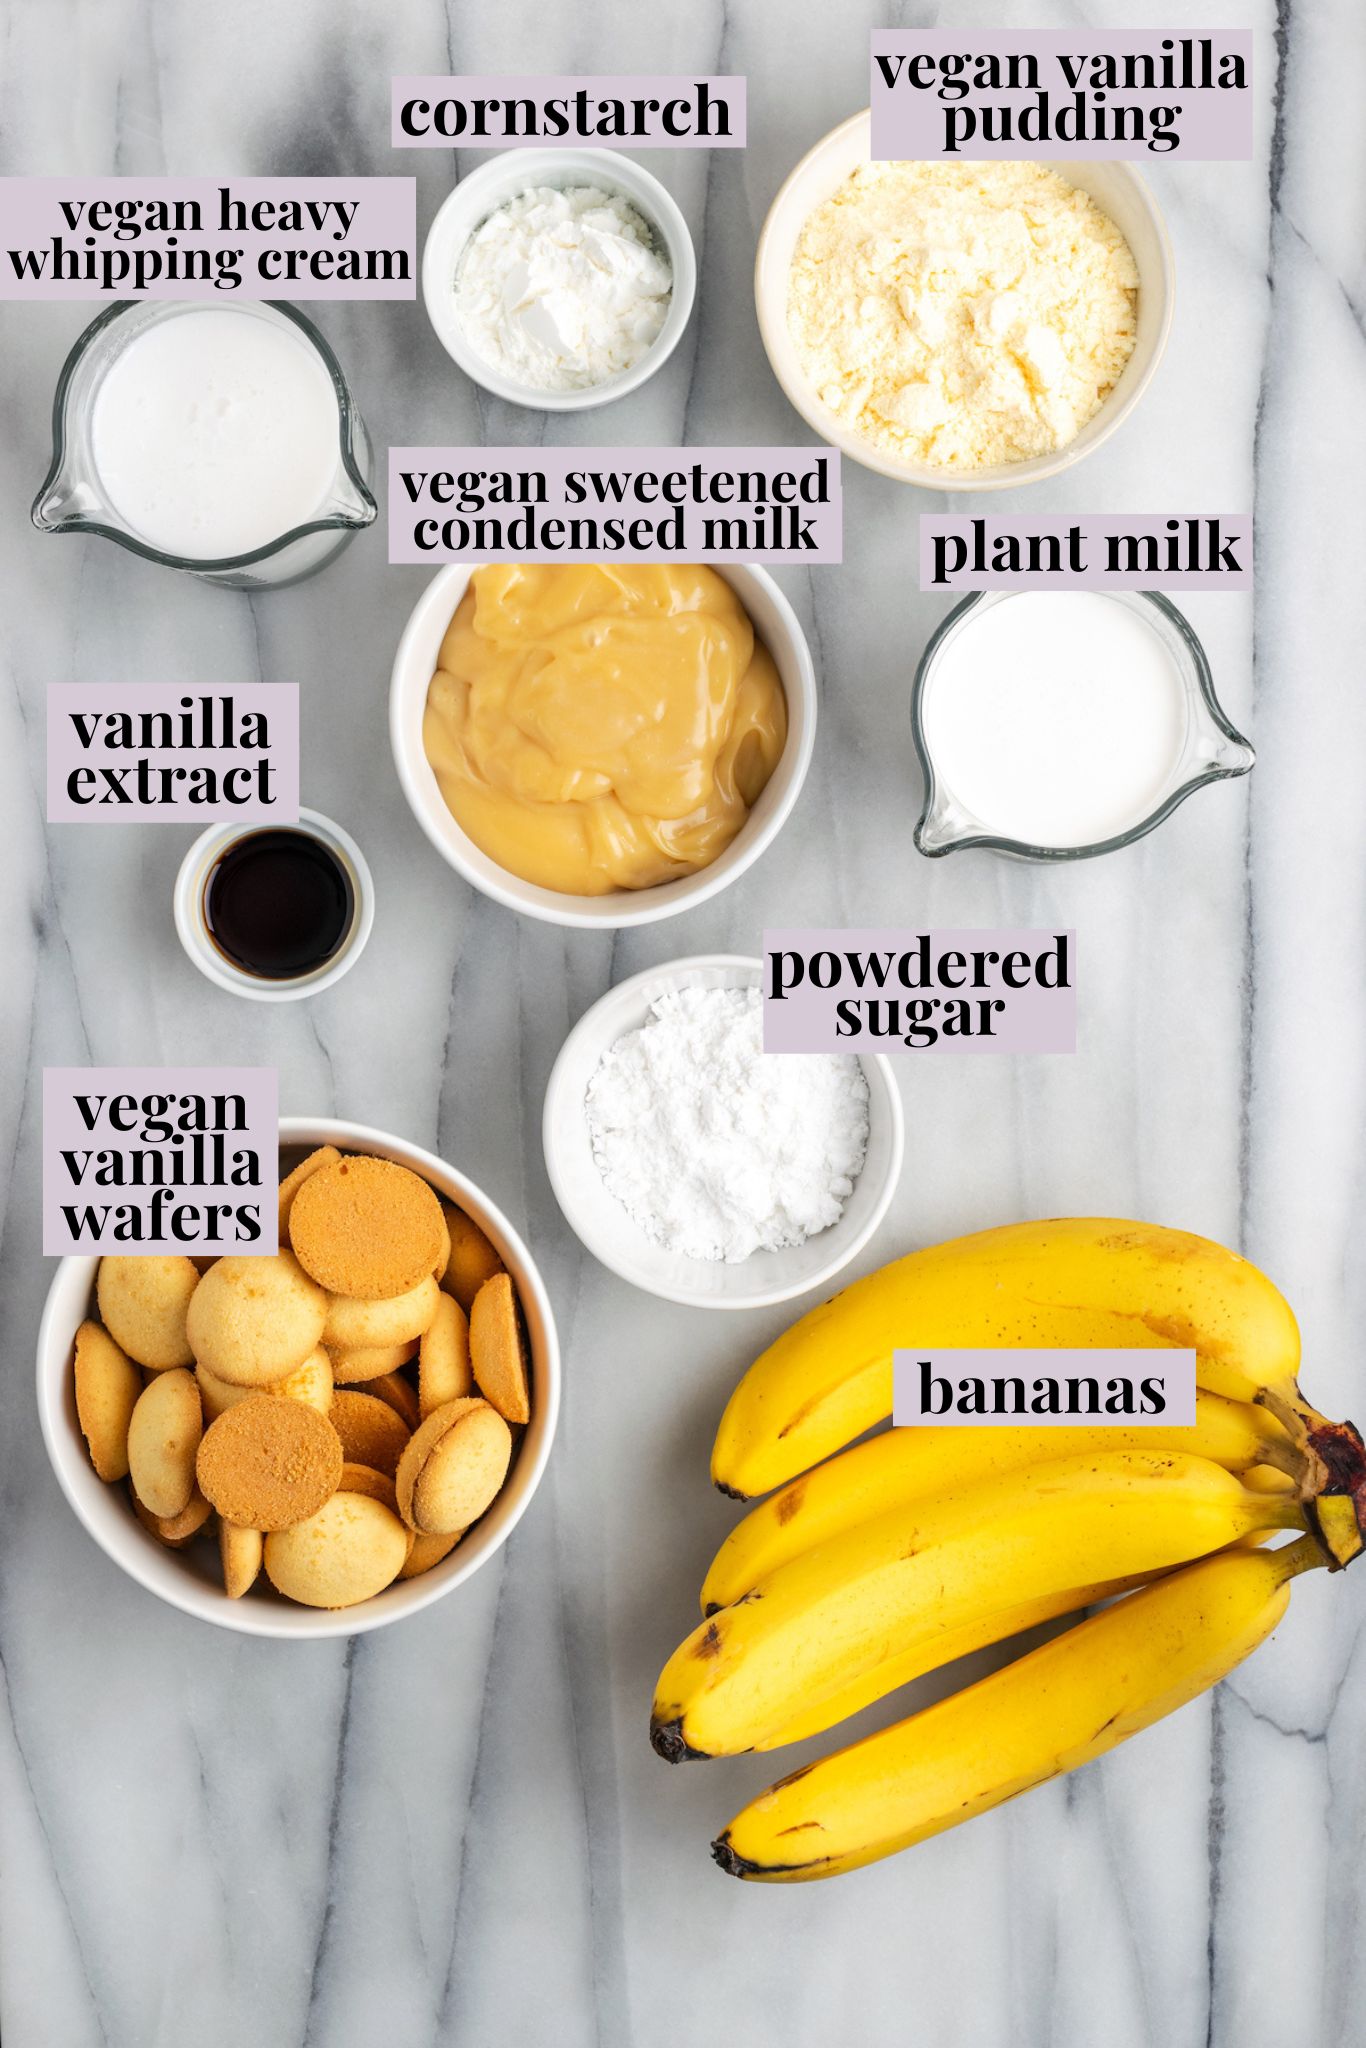 Overhead view of vegan banana pudding ingredients with labels